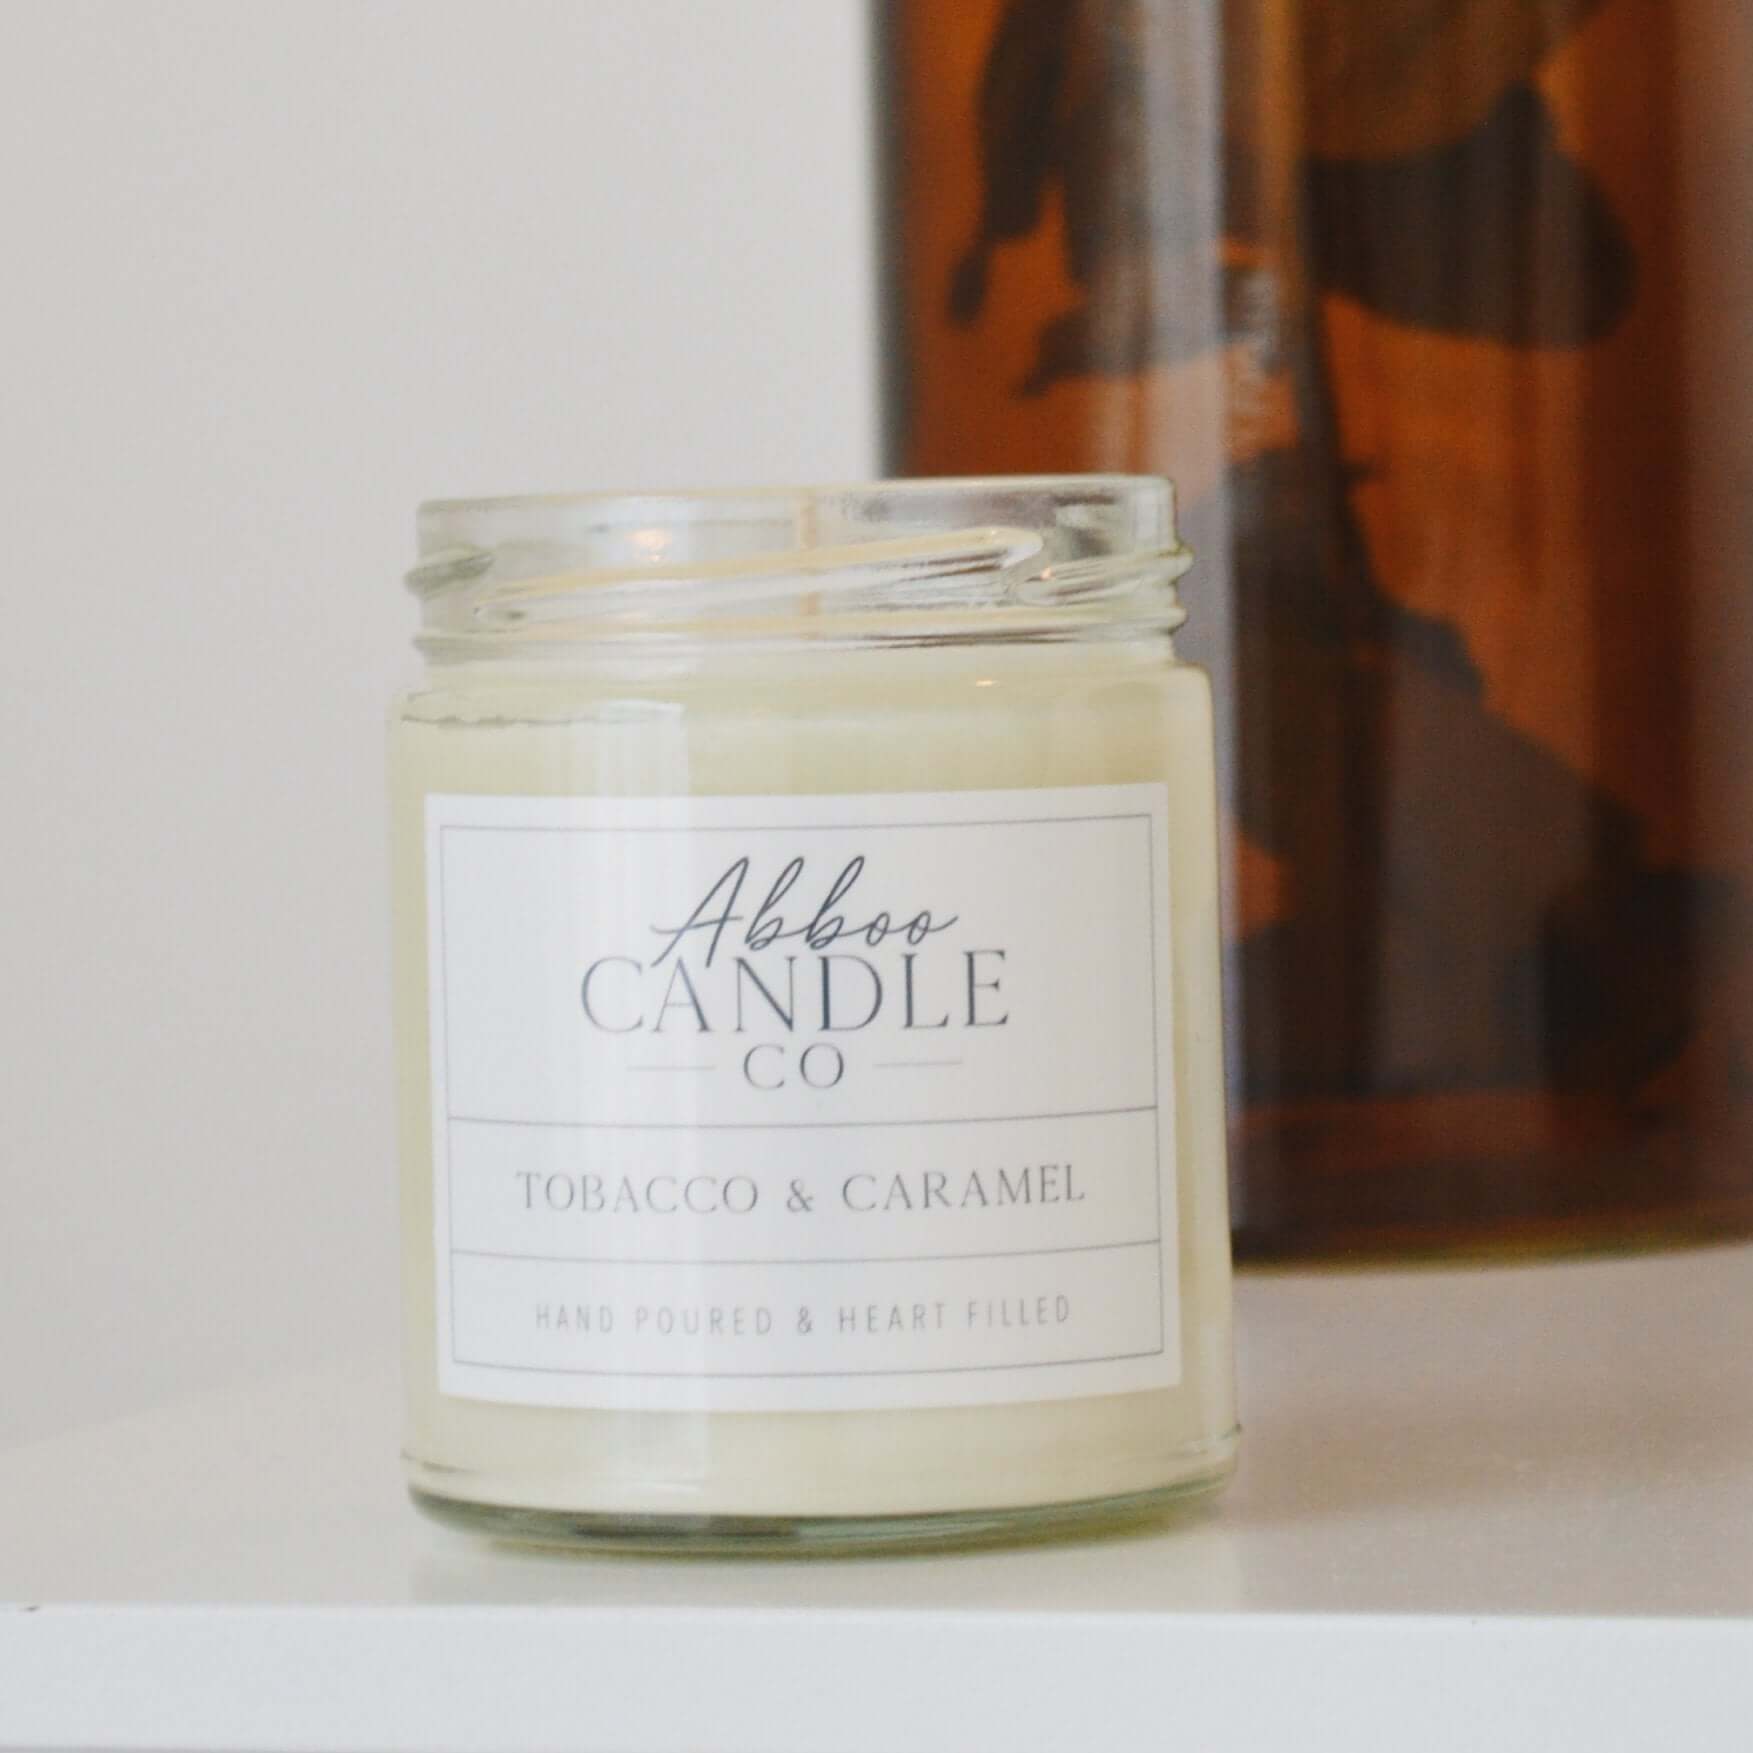 Tobacco and Caramel Soy Candle - Abboo Candle Co